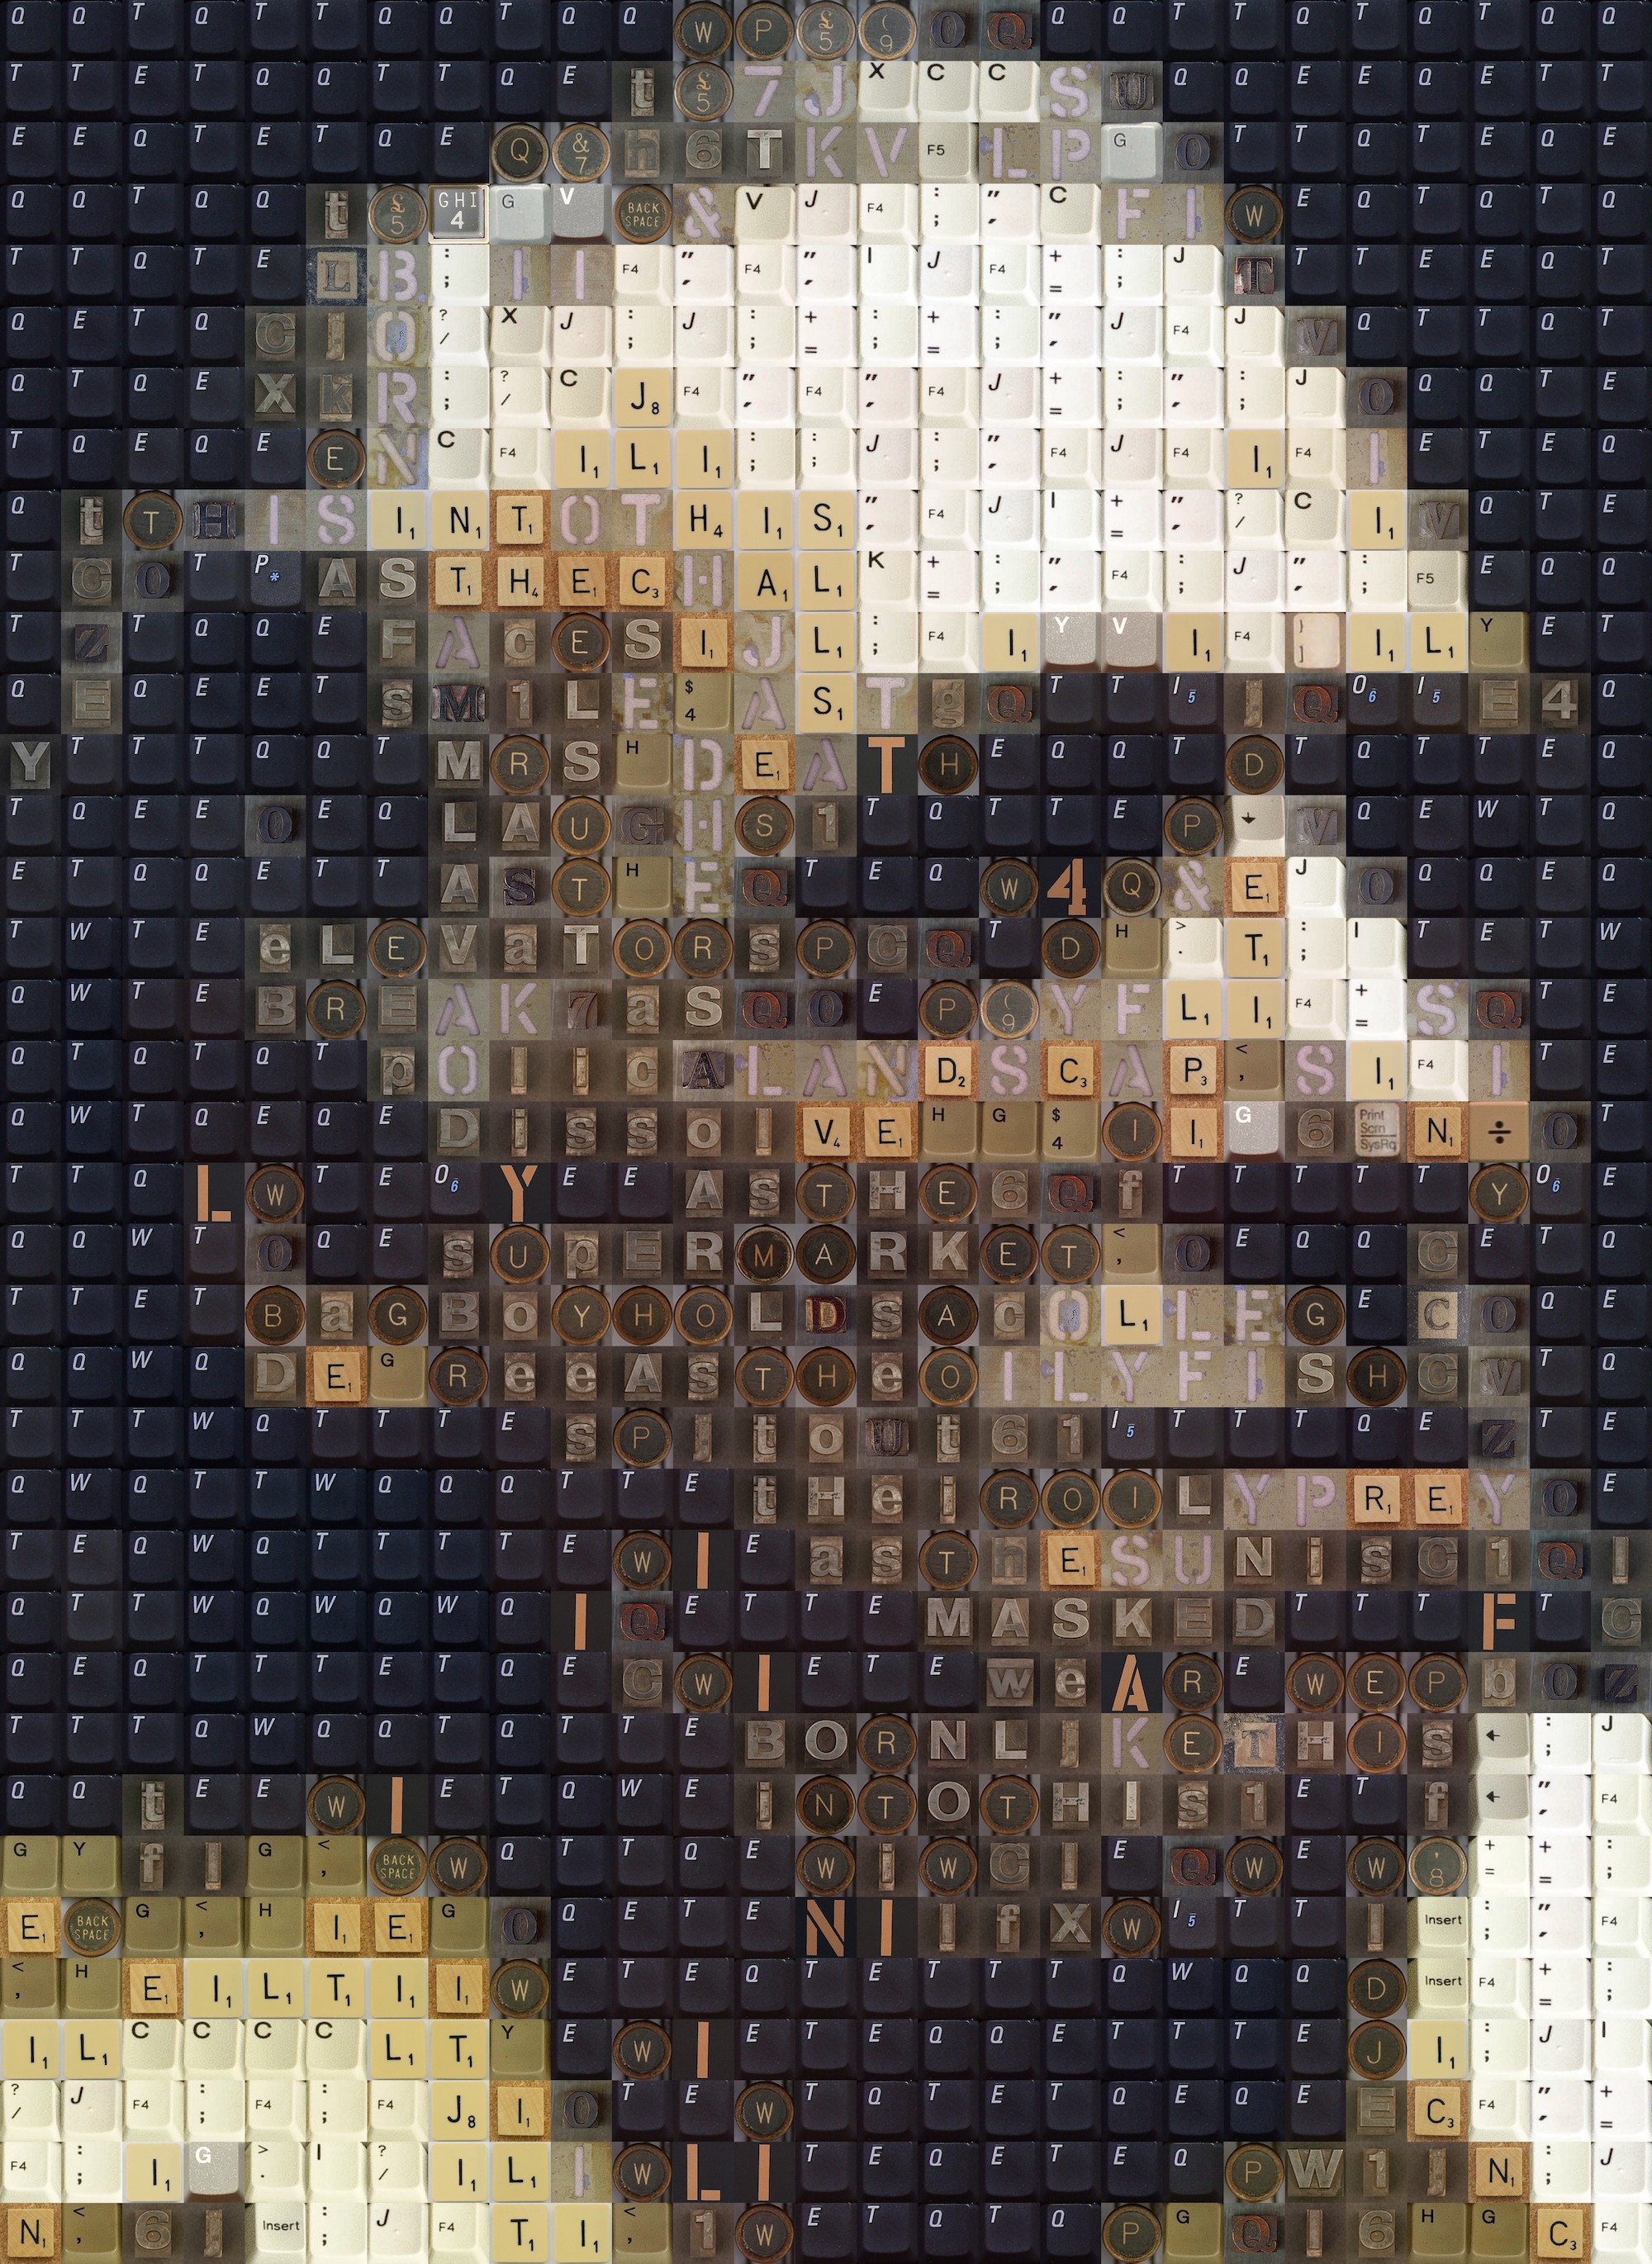 Men Face Portrait Mosaic Charles Bukowski Writers Old People Keyboards Text Numbers Portrait Display 2000x2741